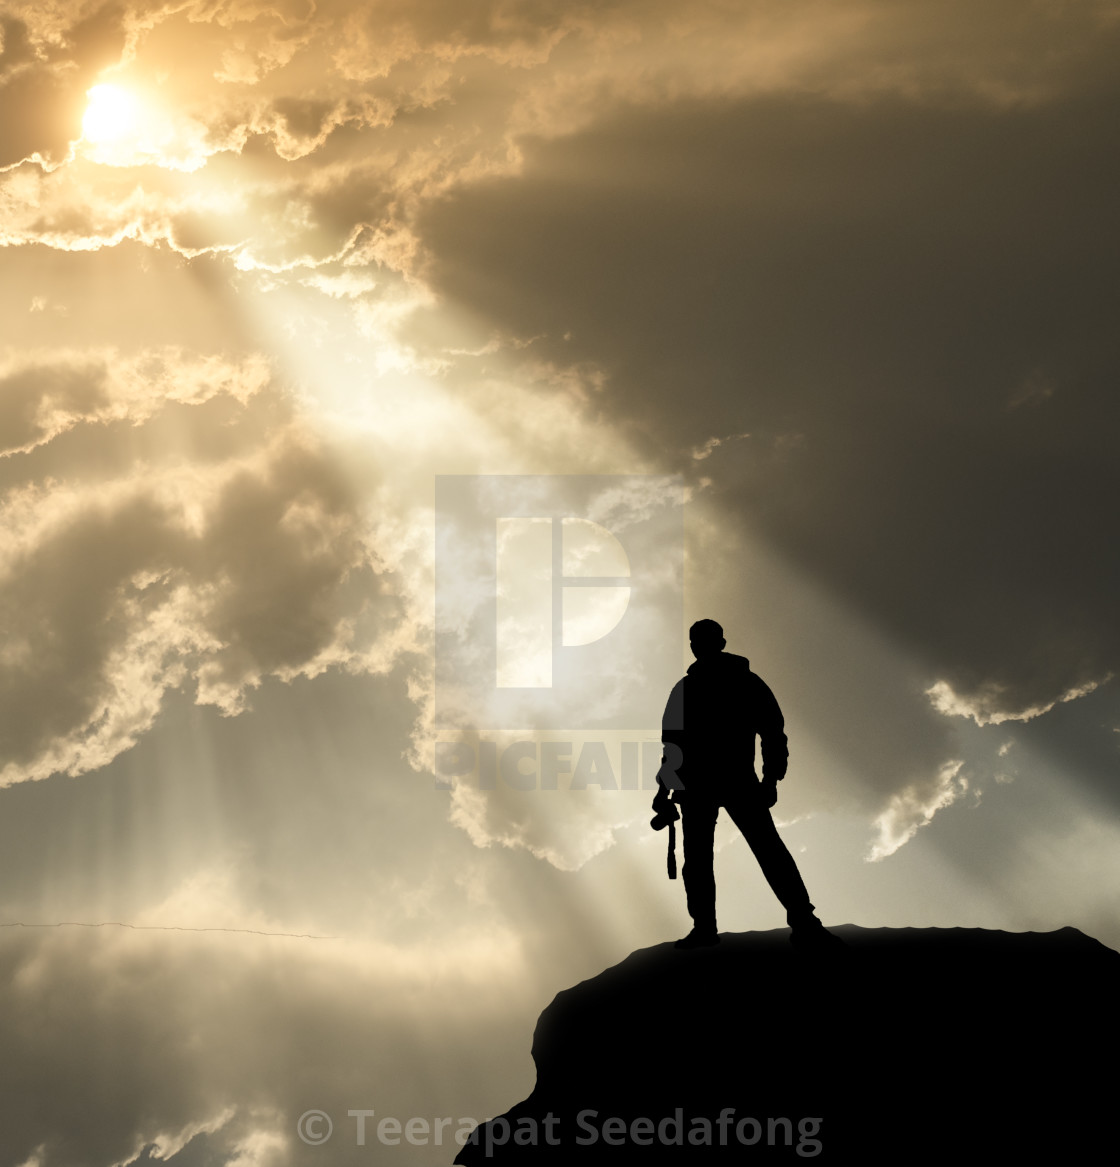 cameraman silhouette standing on cliff with light and sky and cloud background,employee waiting command from leader - License, download or print for £24.80 | Photos | Picfair